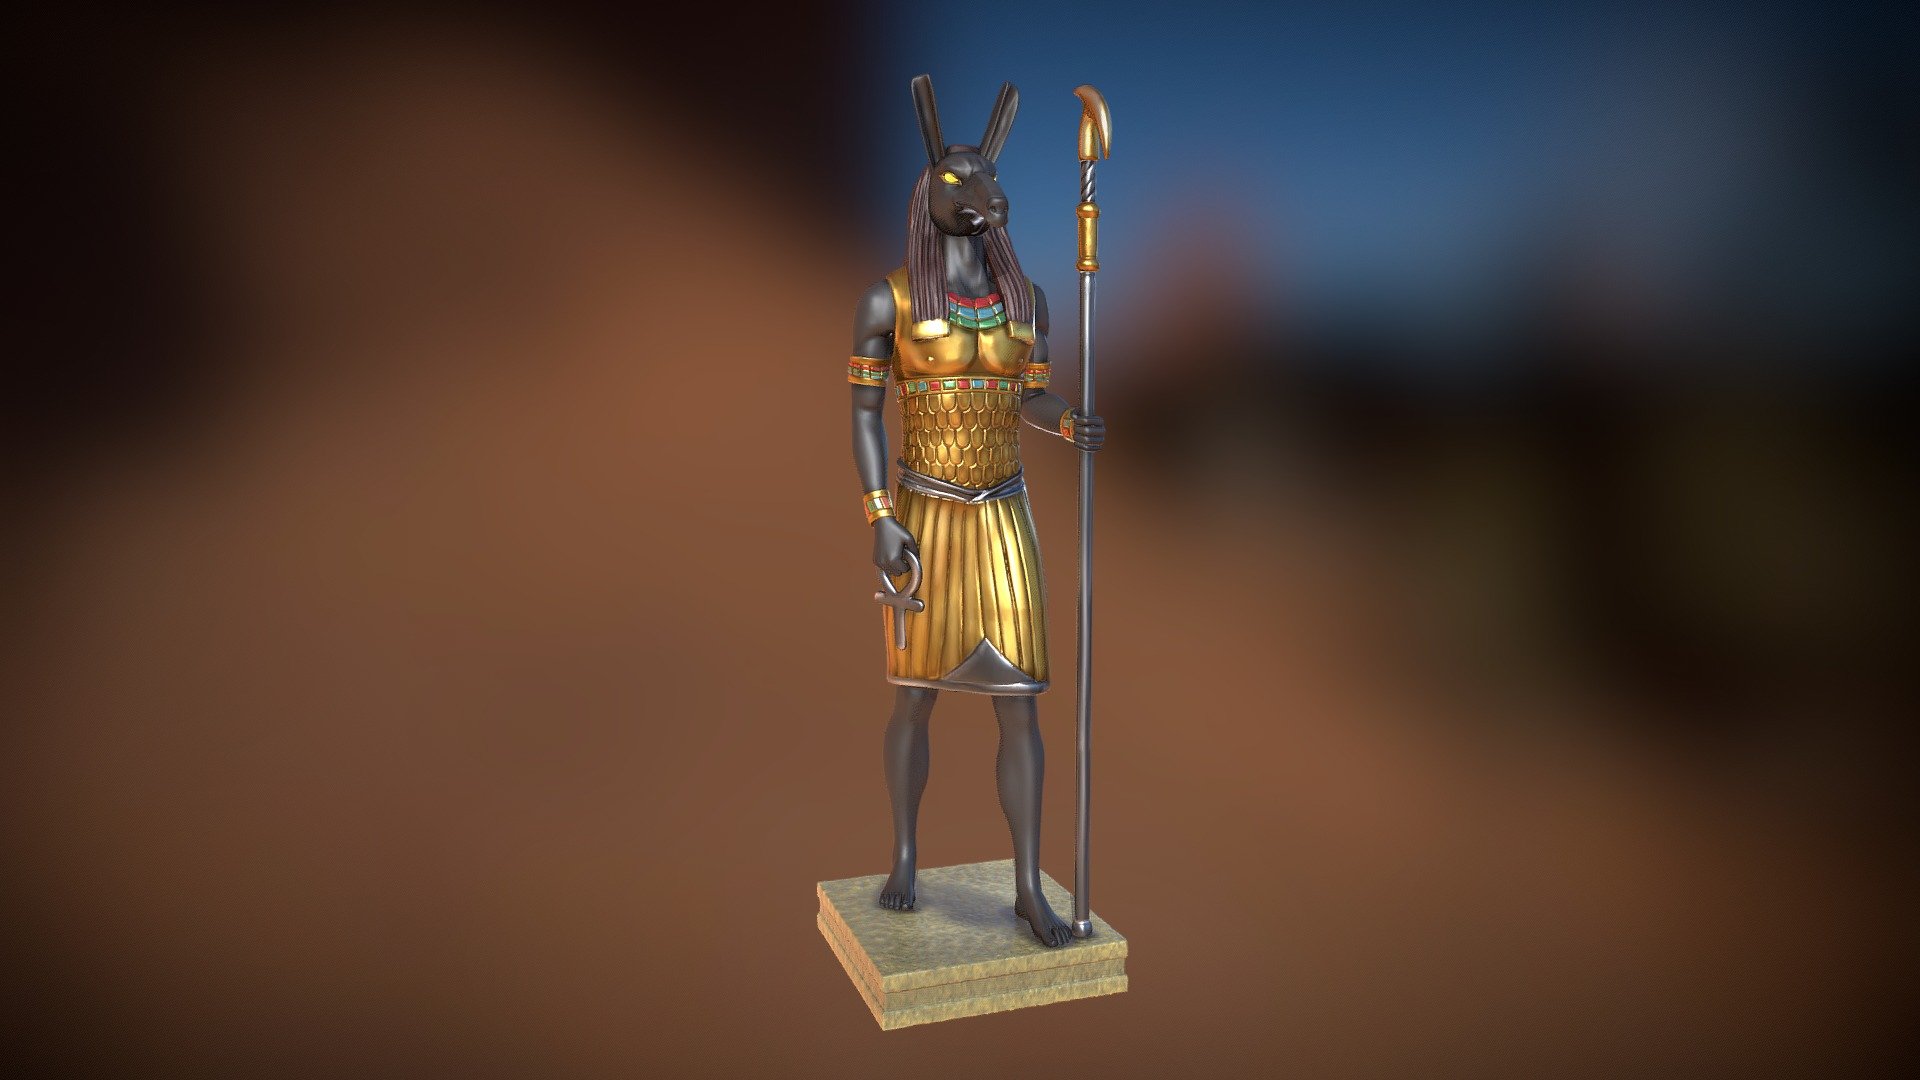 Statue of the Egyptian god Seth for 3D printing and painting.
Ideal for lovers of Egyptian culture and collectors of figures.

Set or Greek: Sethis a god of deserts, storms, disorder, violence, and foreigners in ancient Egyptian religion.
In Ancient Greek, the god's name is given as Sēth (Σήθ). Set had a positive role where he accompanies Ra on his barque to repel Apep, the serpent of Chaos. Set had a vital role as a reconciled combatant  He was lord of the Red Land (desert), where he was the balance to Horus' role as lord of the Black Land (fertile land) 3d model